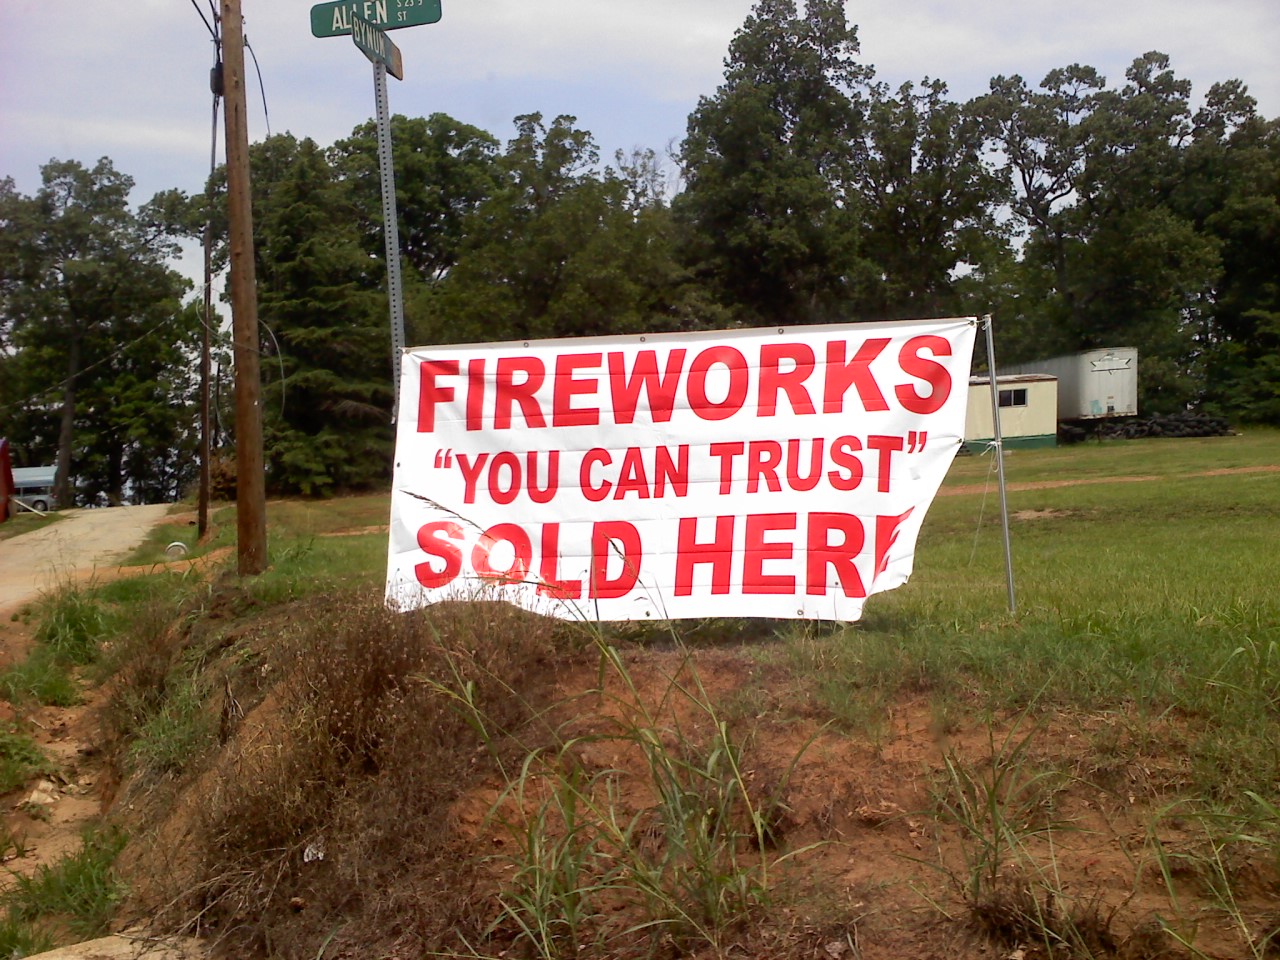 unnecessary quotations - Alkens Fireworks You Can Trust" Sold Her